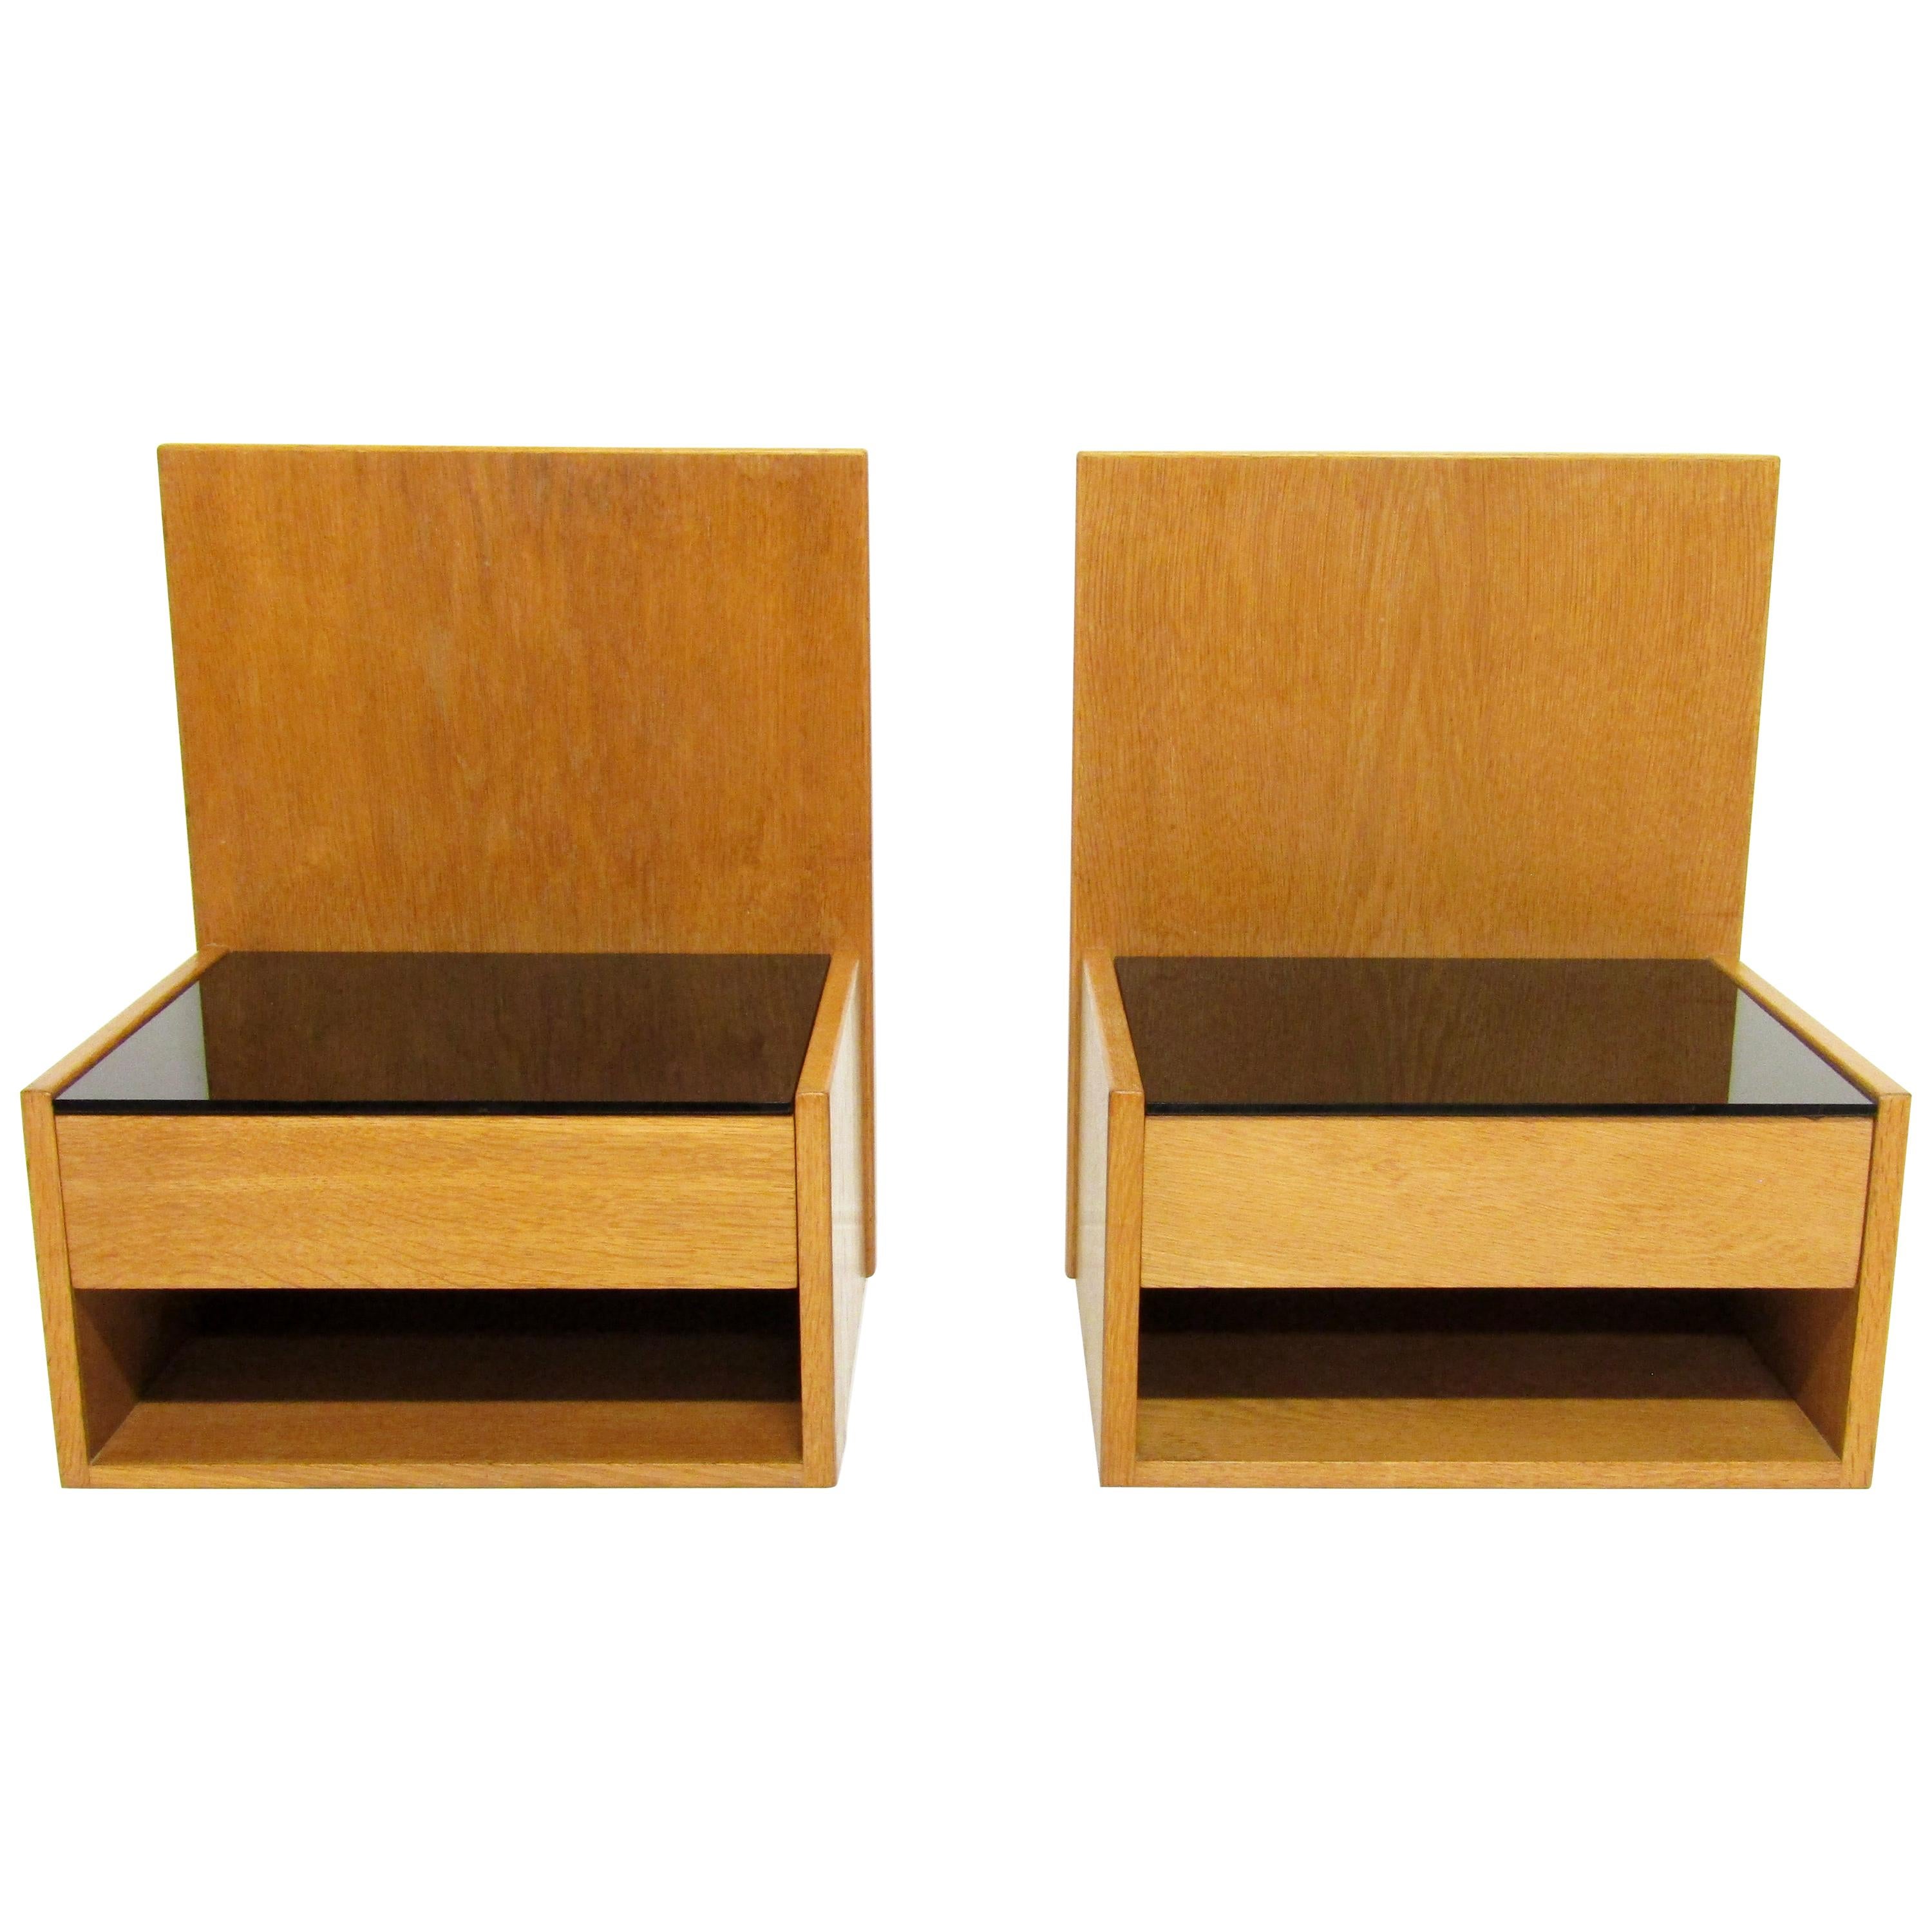 Two Danish 1960s Floating Bedside Nightstands in Oak and Glass by Hans Wegner